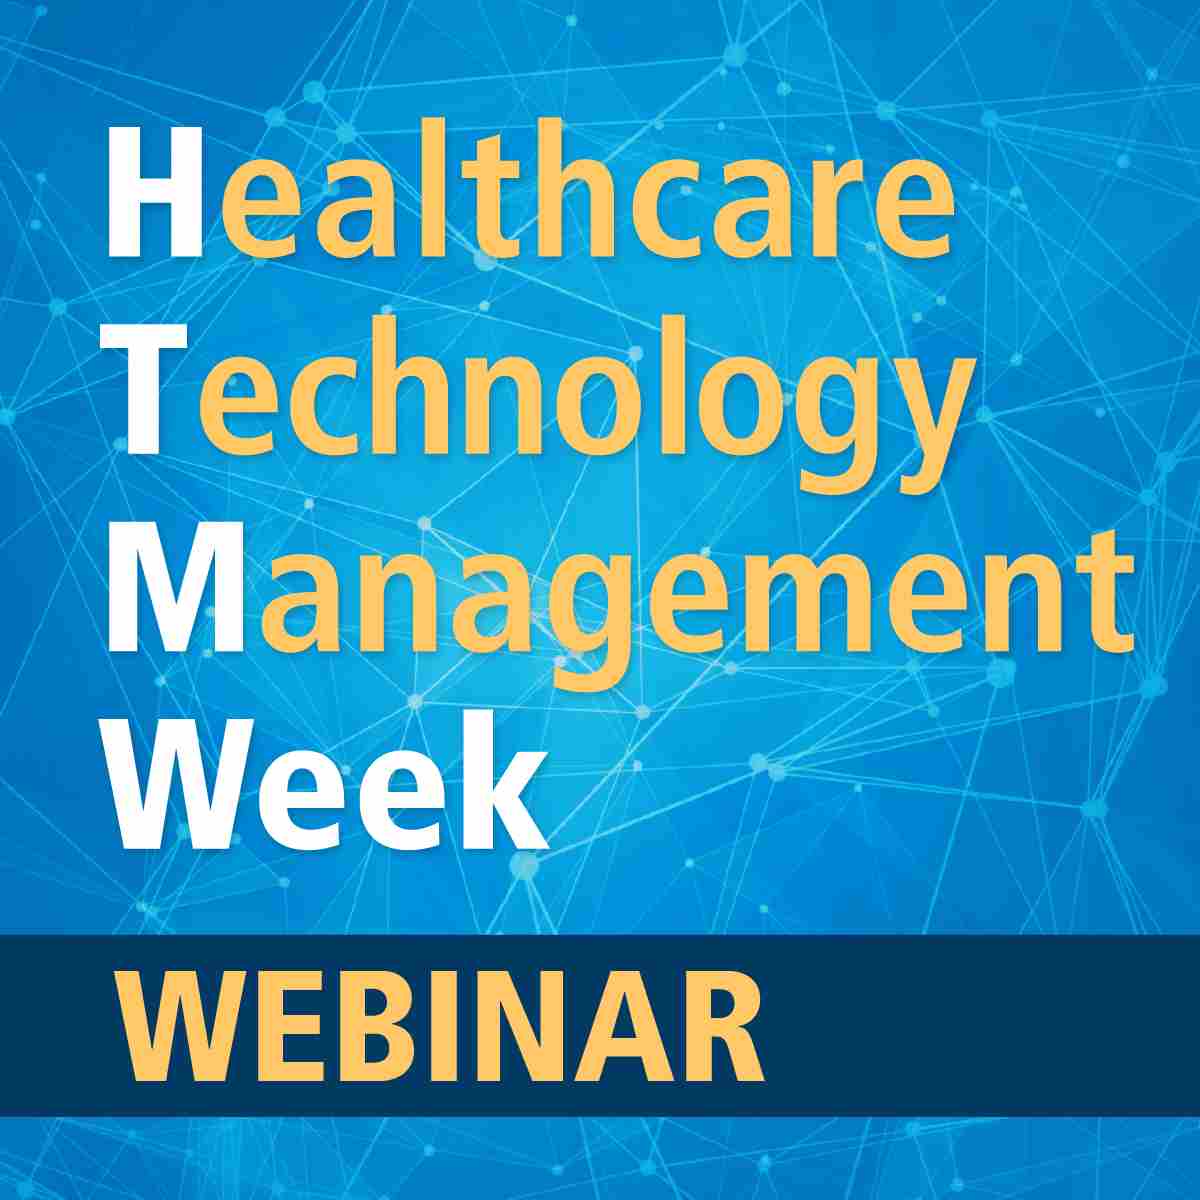 HTM Week Webinar: Medical Device Reporting and FDA Basics for HTM Professionals